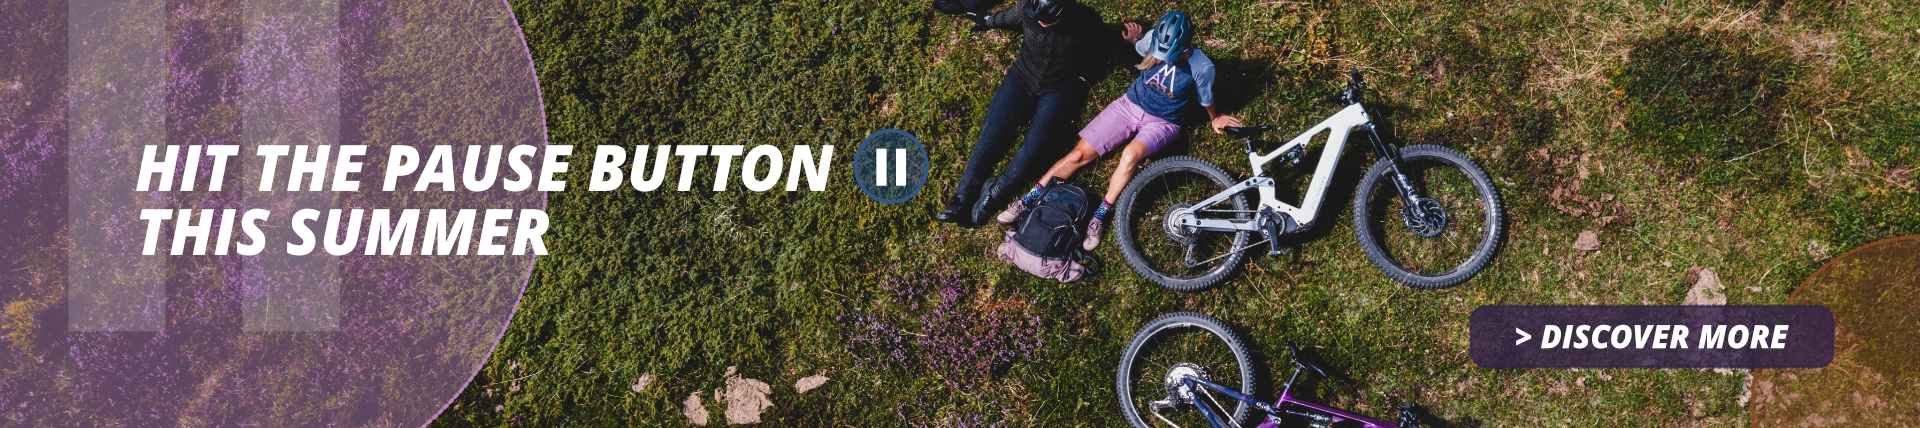 https://www.ebike24.com/hit-the-pause-button-this-summer